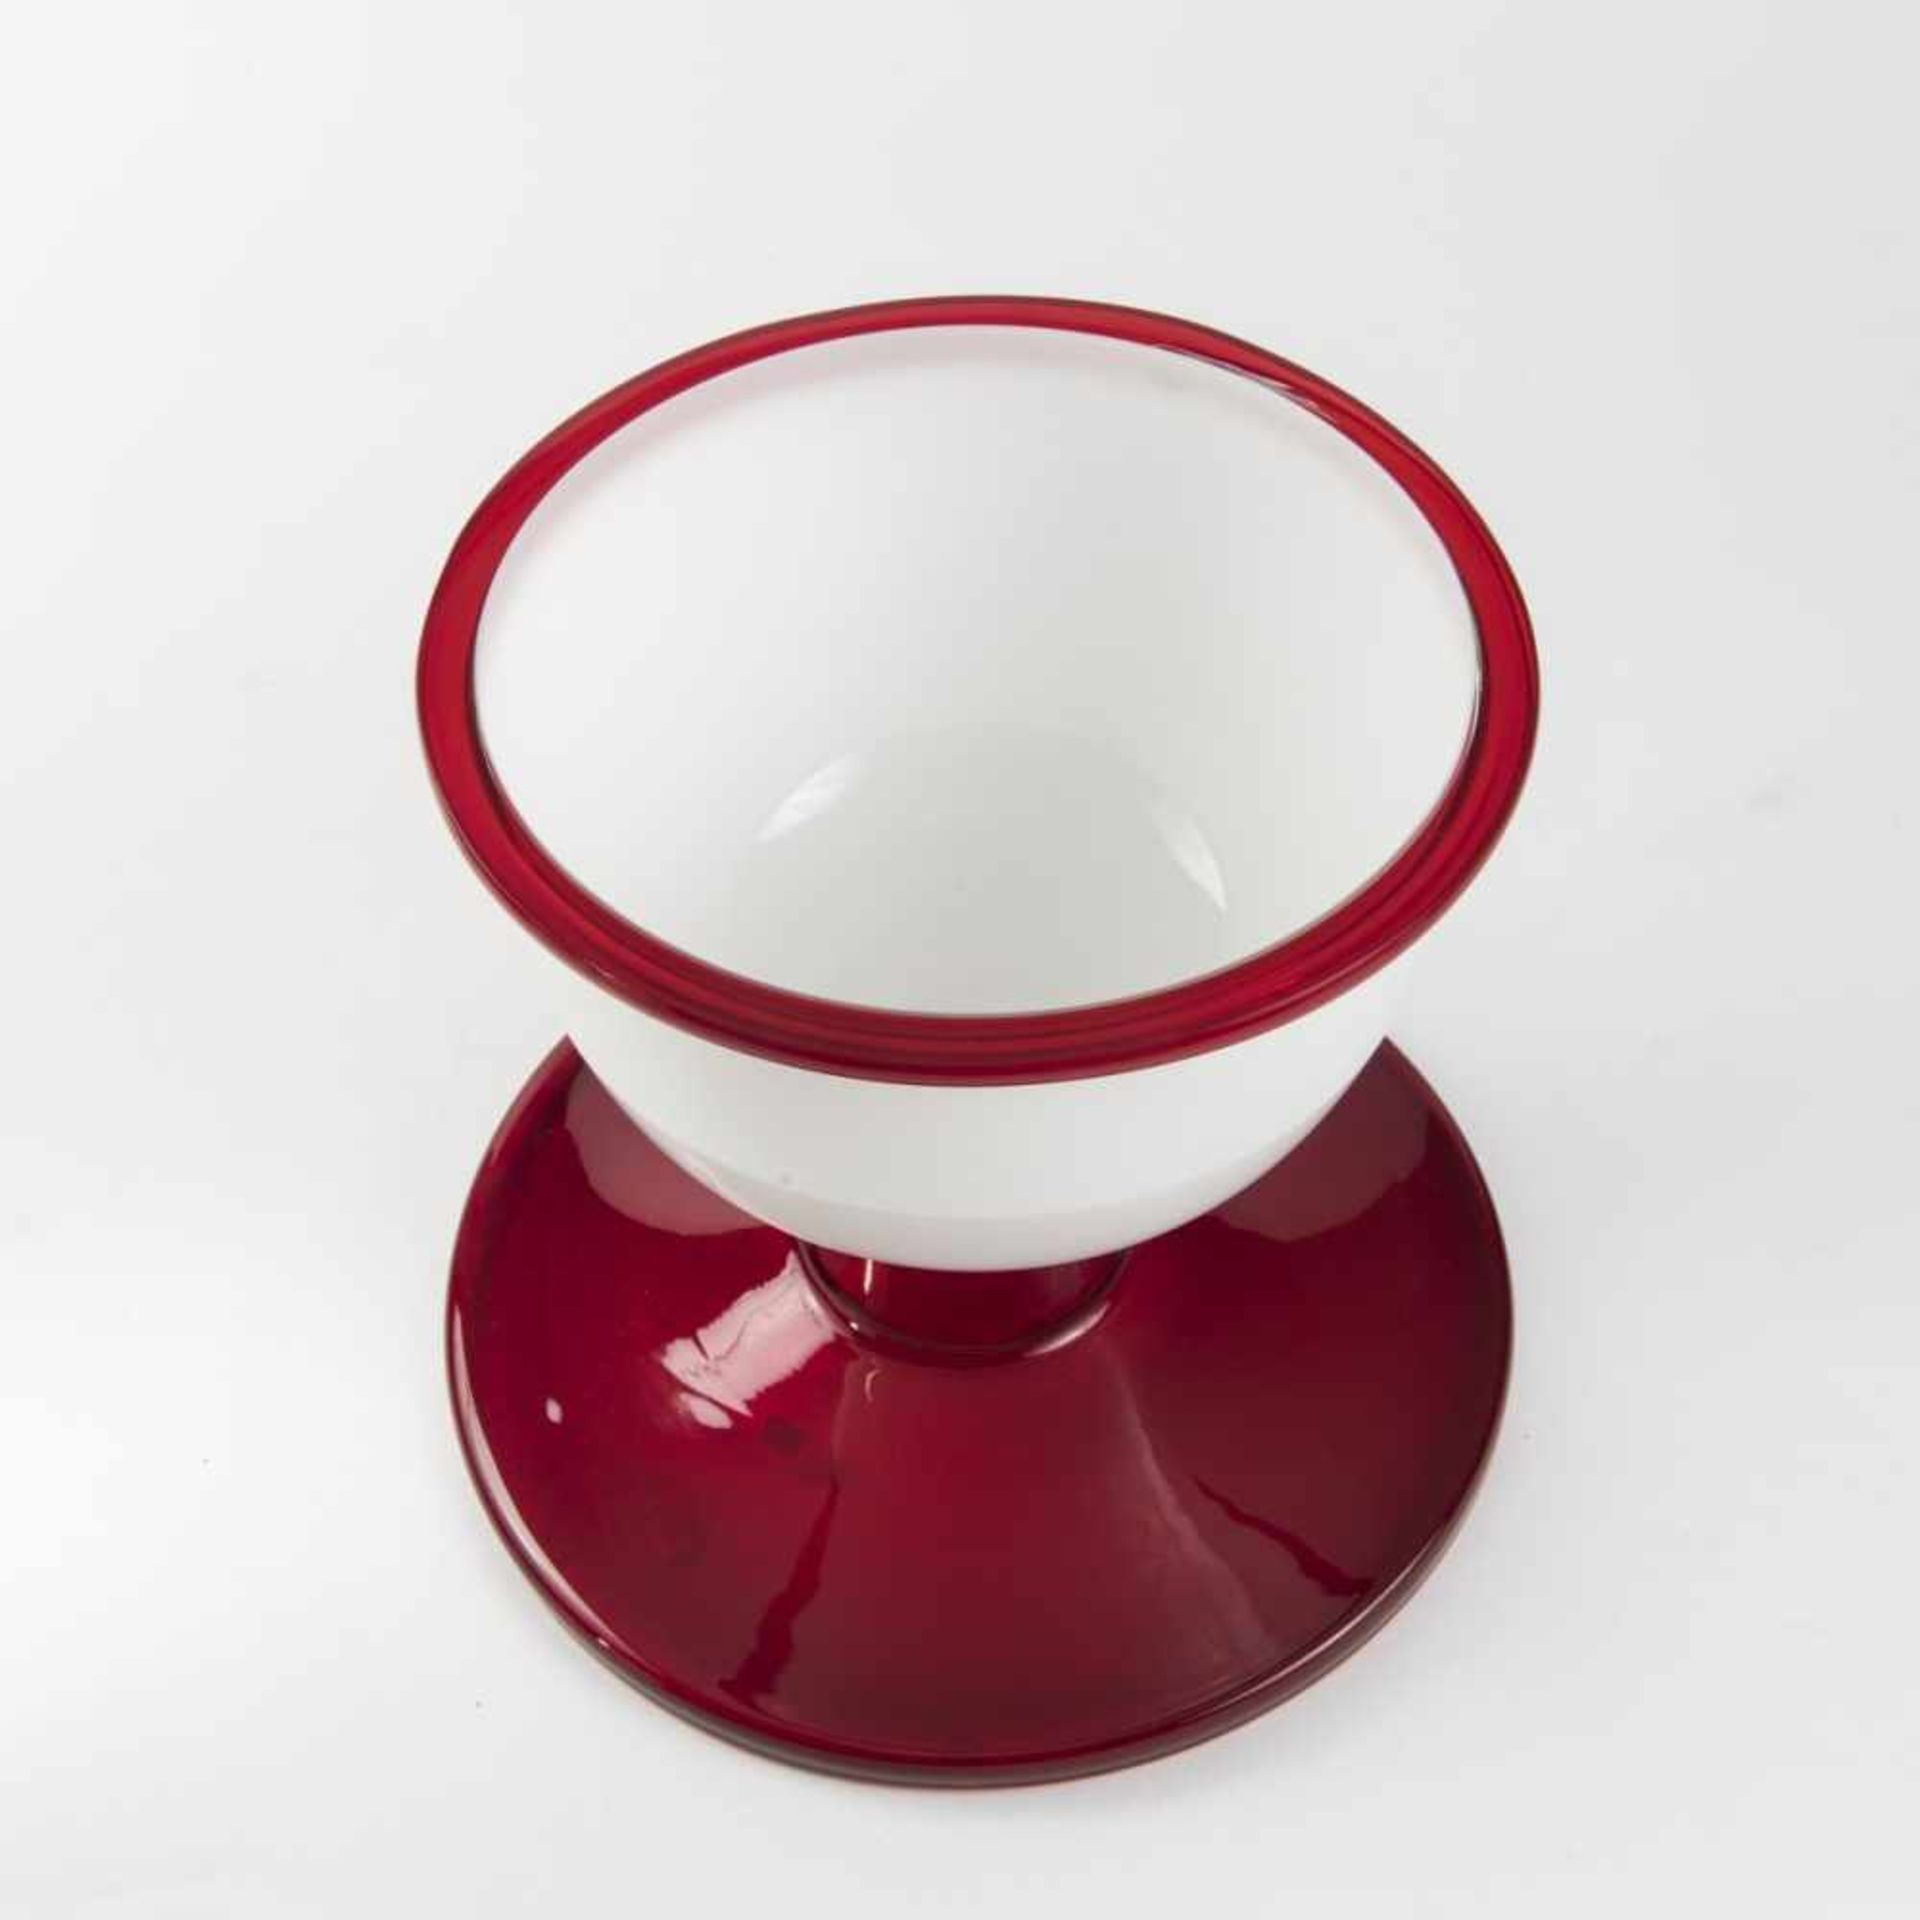 Ettore Sottsass, Footed 'Schiavona' bowl, 1974Footed 'Schiavona' bowl, 1974H. 25 cm. Made by - Bild 2 aus 3